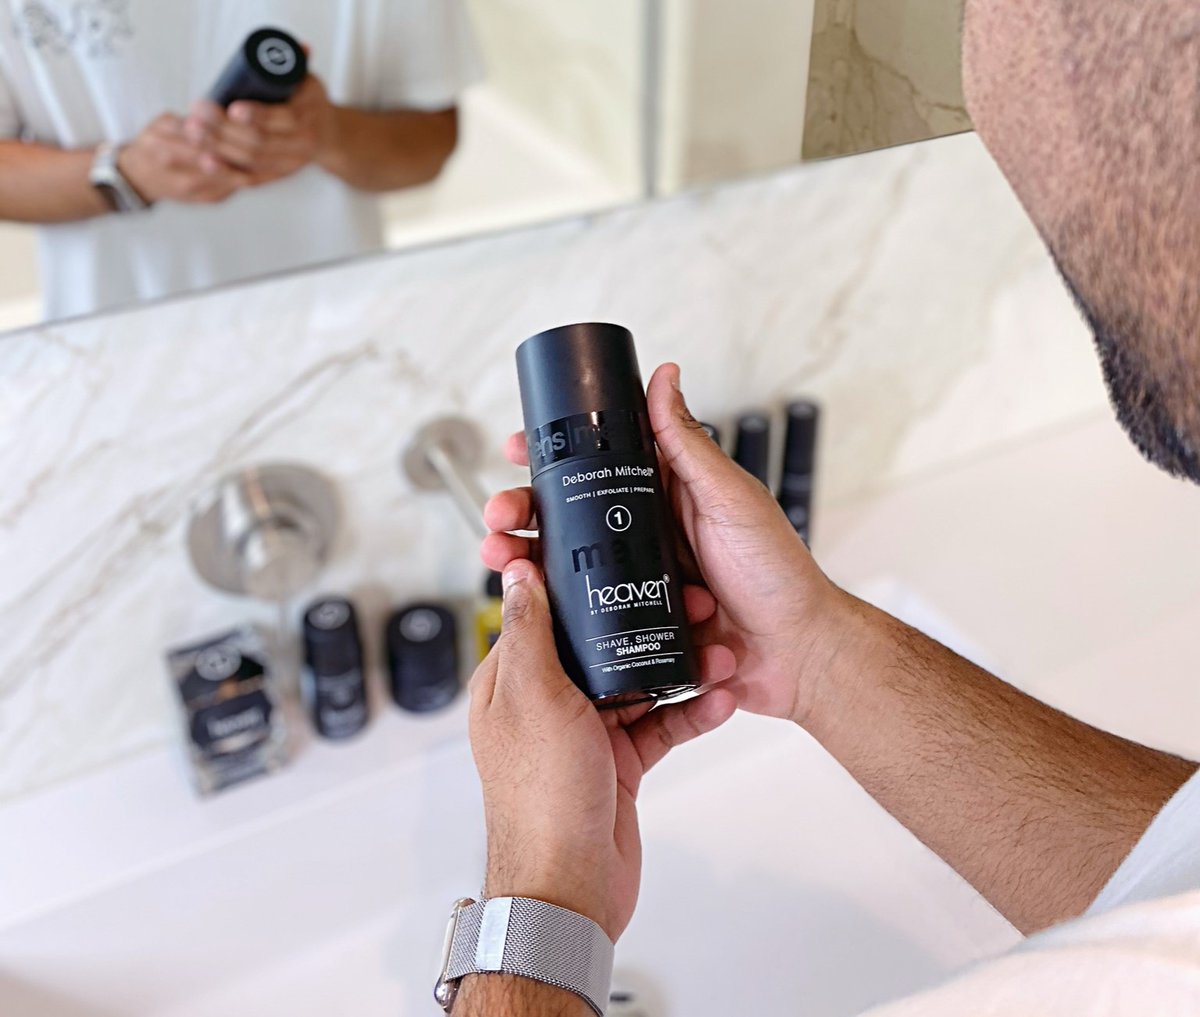 #GroomingTips Who doesn’t love a product with a multitude of uses! Use my Shave, Shower & Shampoo as a shower gel, a shampoo and a shaving wash. It suits all skin types and contains organic essential oils. Win, win 👏 #FathersDay #HeavenSkincare ow.ly/SyG350OCv5o